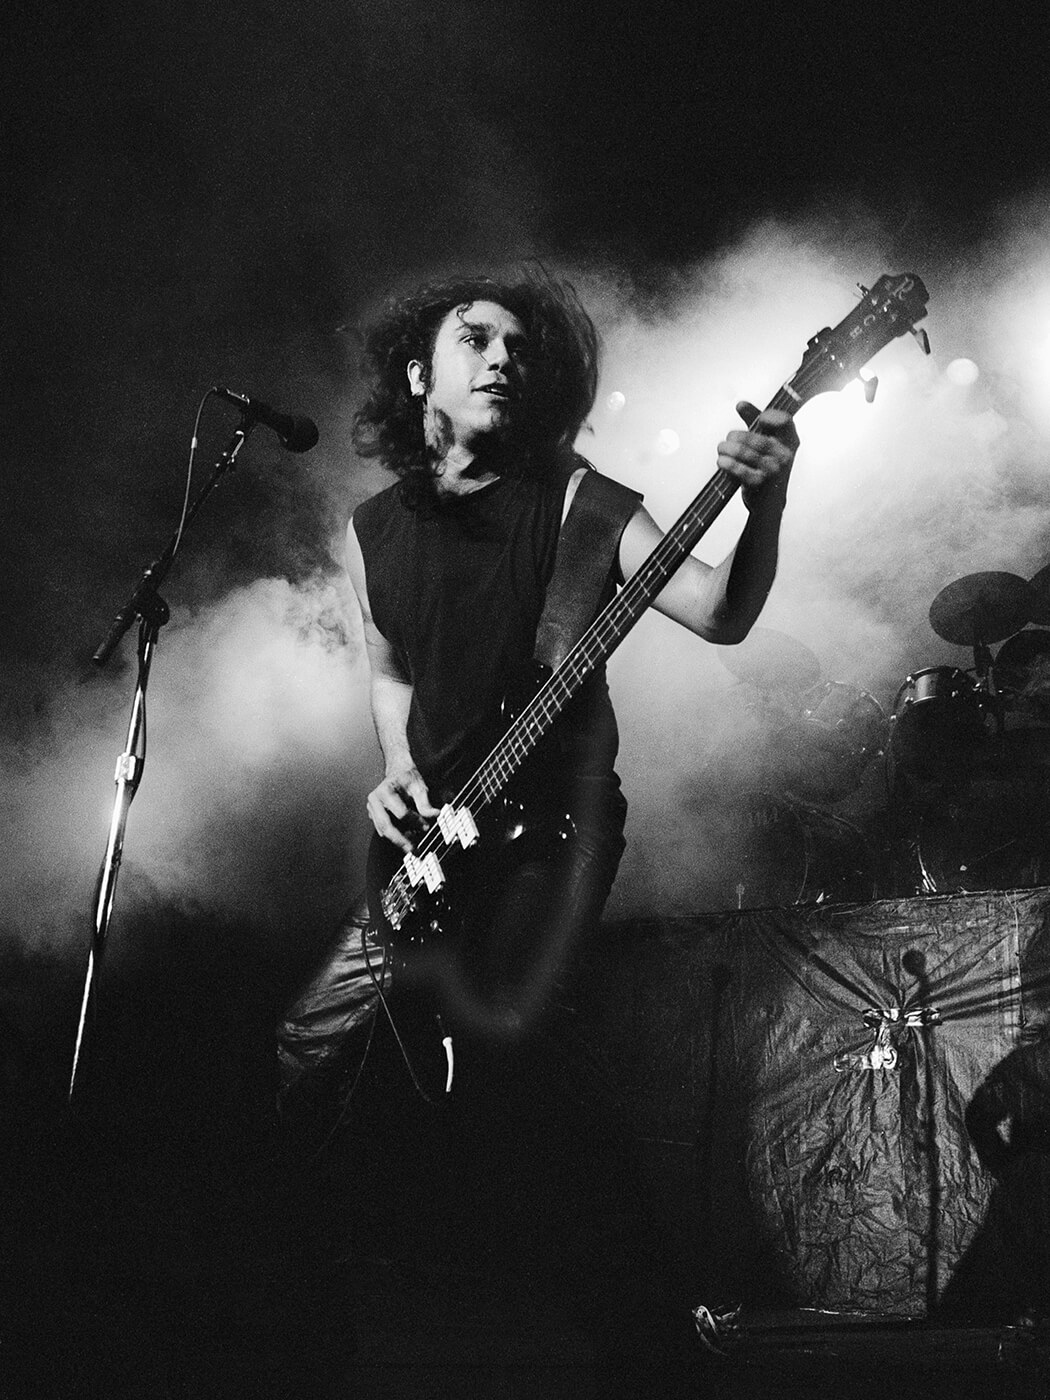 Tom Araya performing in the 1980s, photo by Alison S. Braun/CORBIS via Getty Images